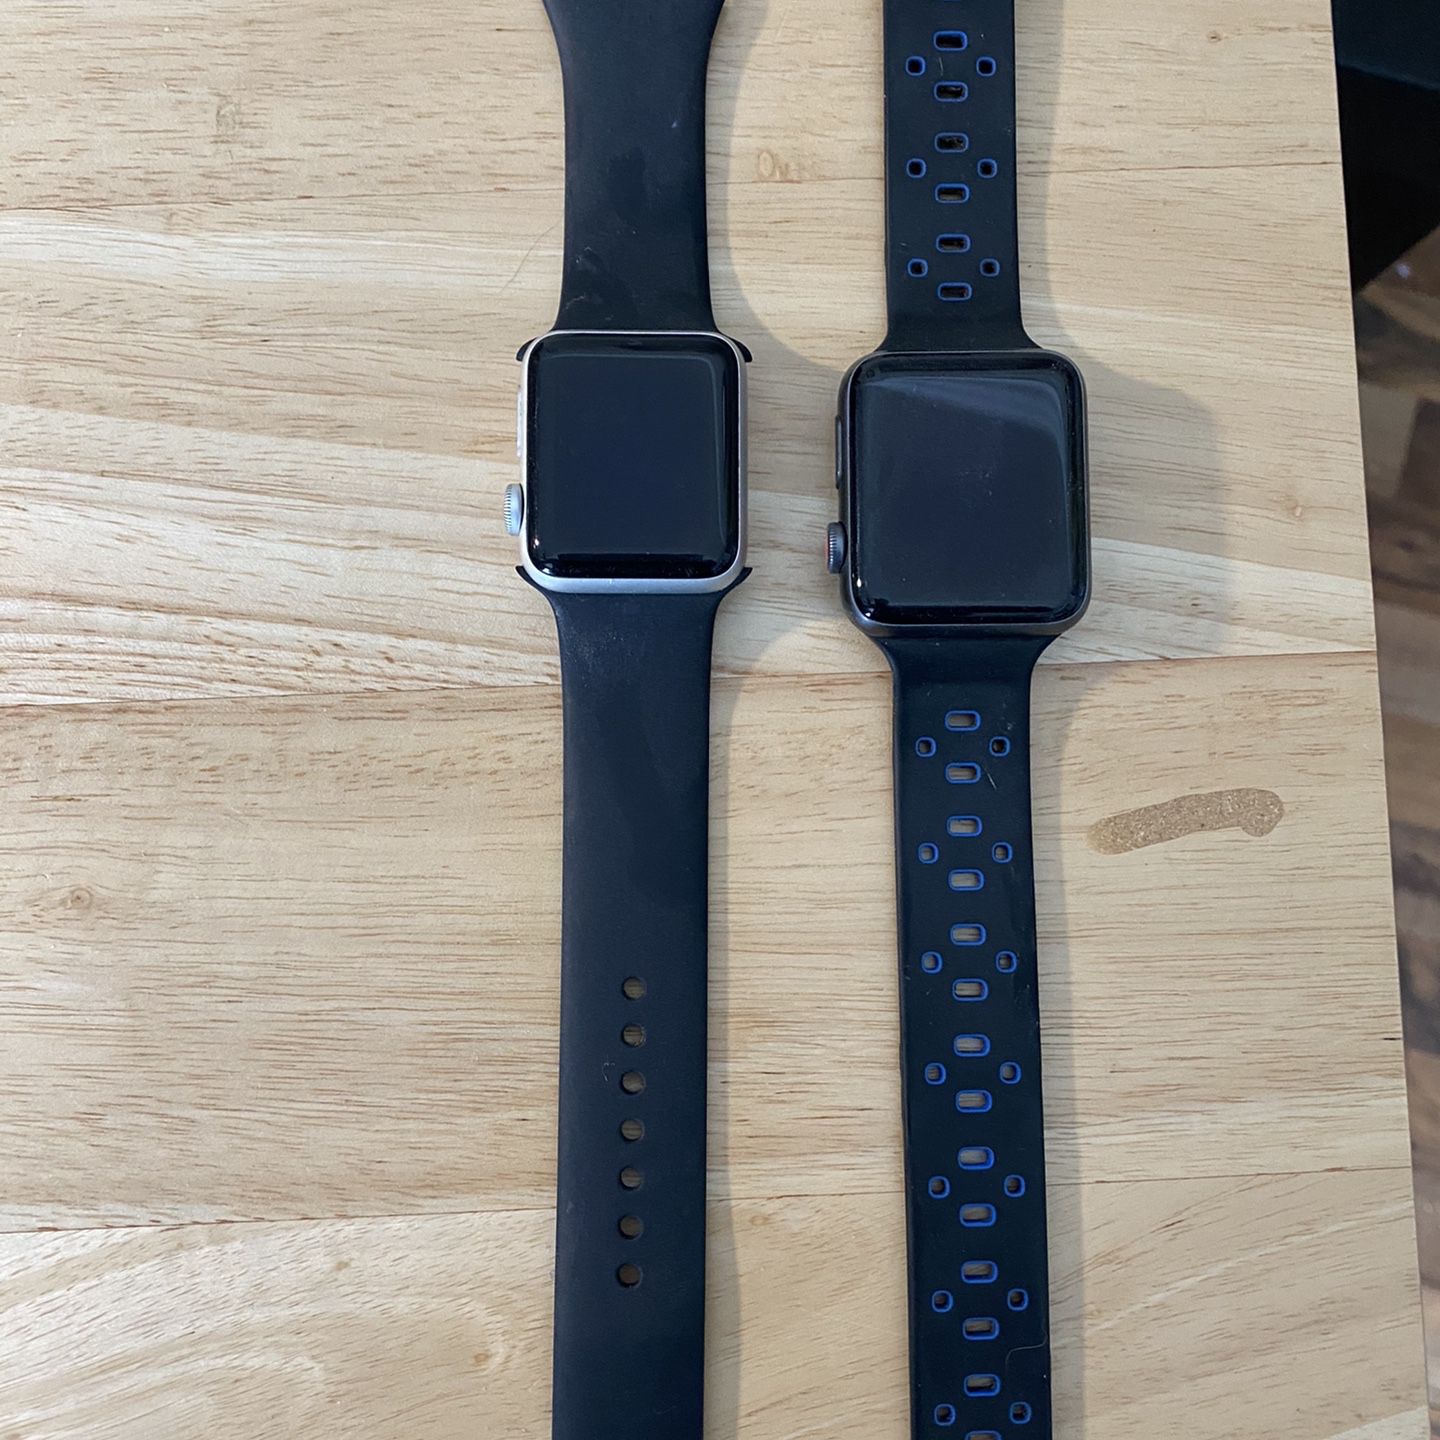 Apple Watch Series 3 - His&Her’s OBO